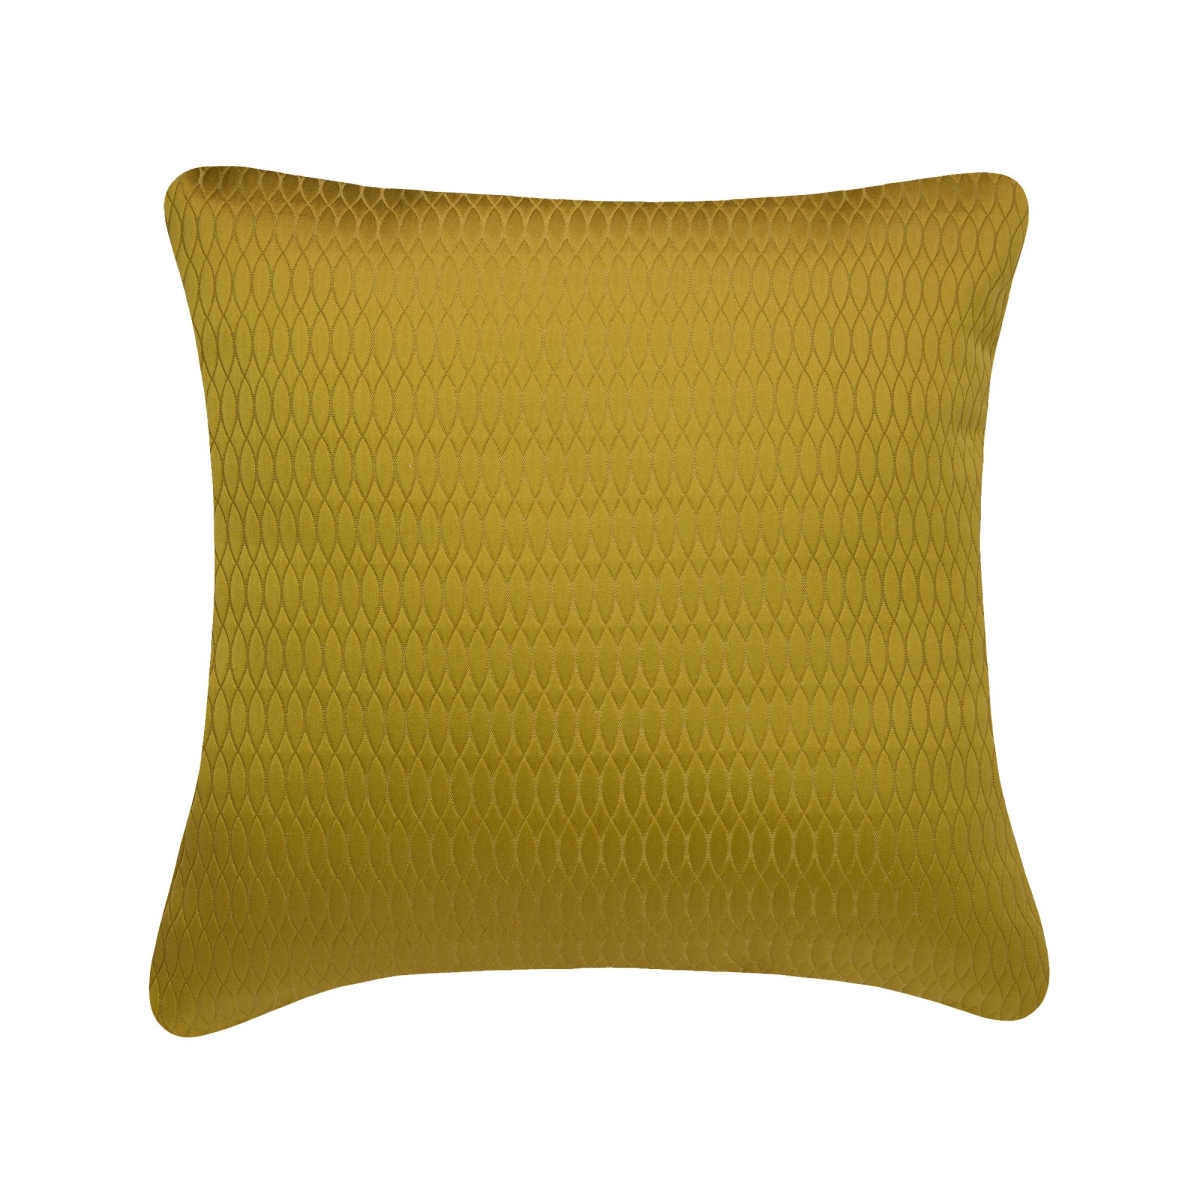 18 X 18 In. Biscay Euro Decorative Cushion, Gold - 100 Percent Polyester